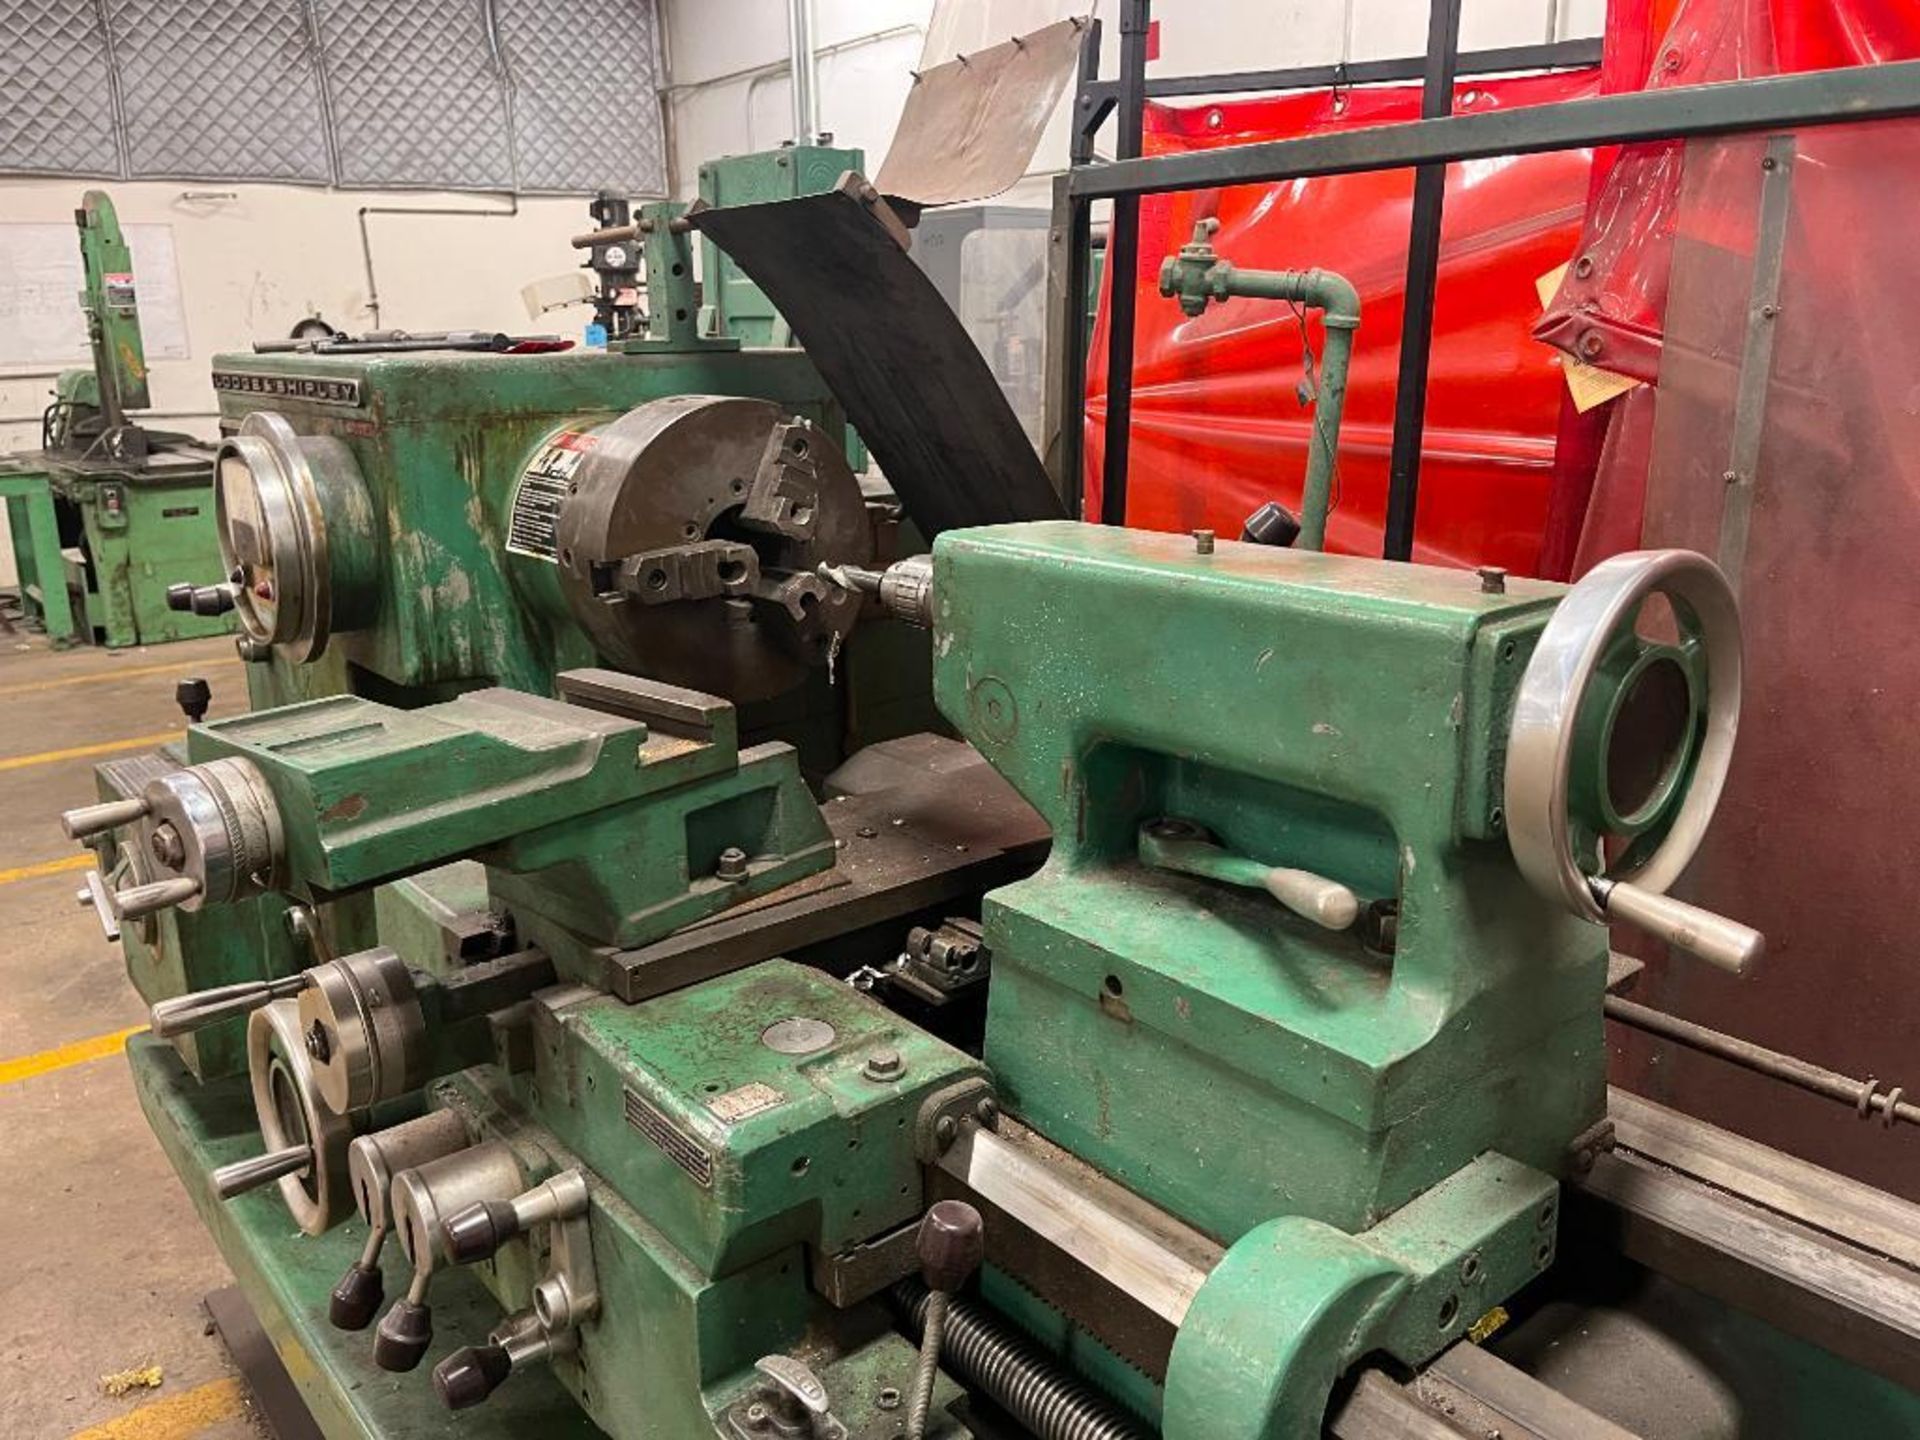 Lodge & Shipley AVS Engine Lathe, 24" x 72" with 12" 3 Jaw Chuck, Tailstock Steady Rest, Model 2010/ - Image 7 of 12